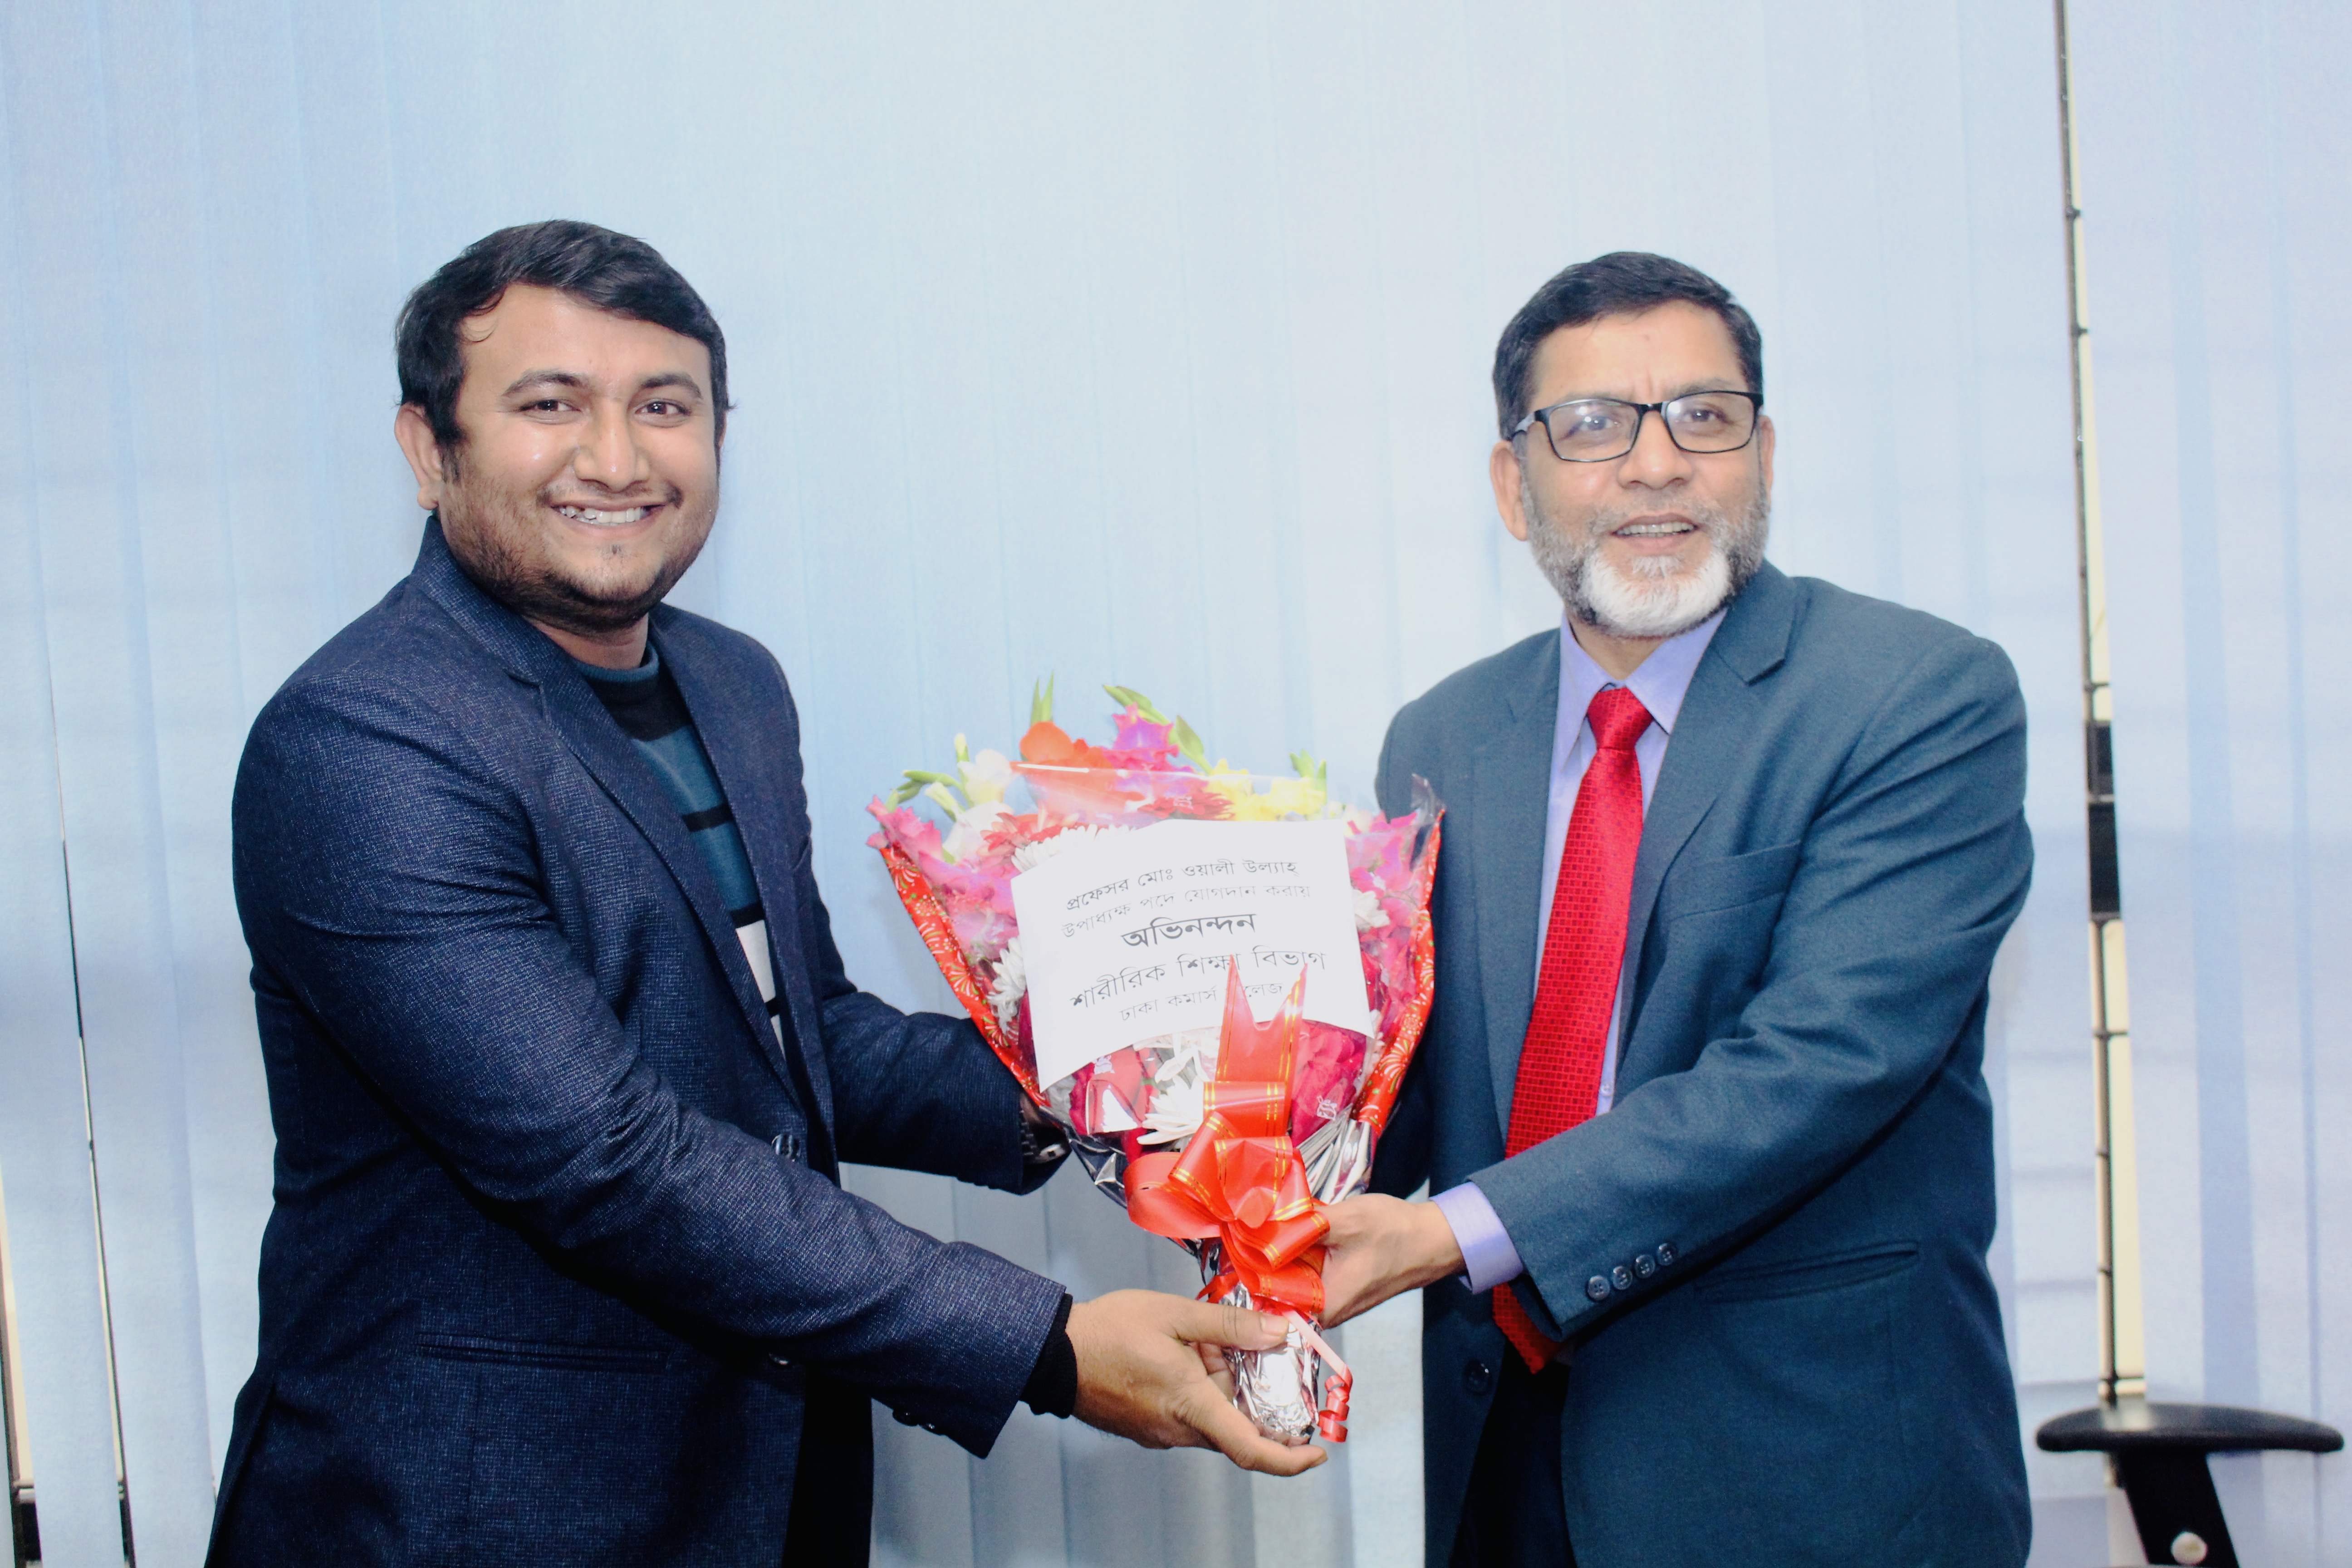 Reception to Vice Principal Prof. Md. Wali Ullah by Physical Education Department